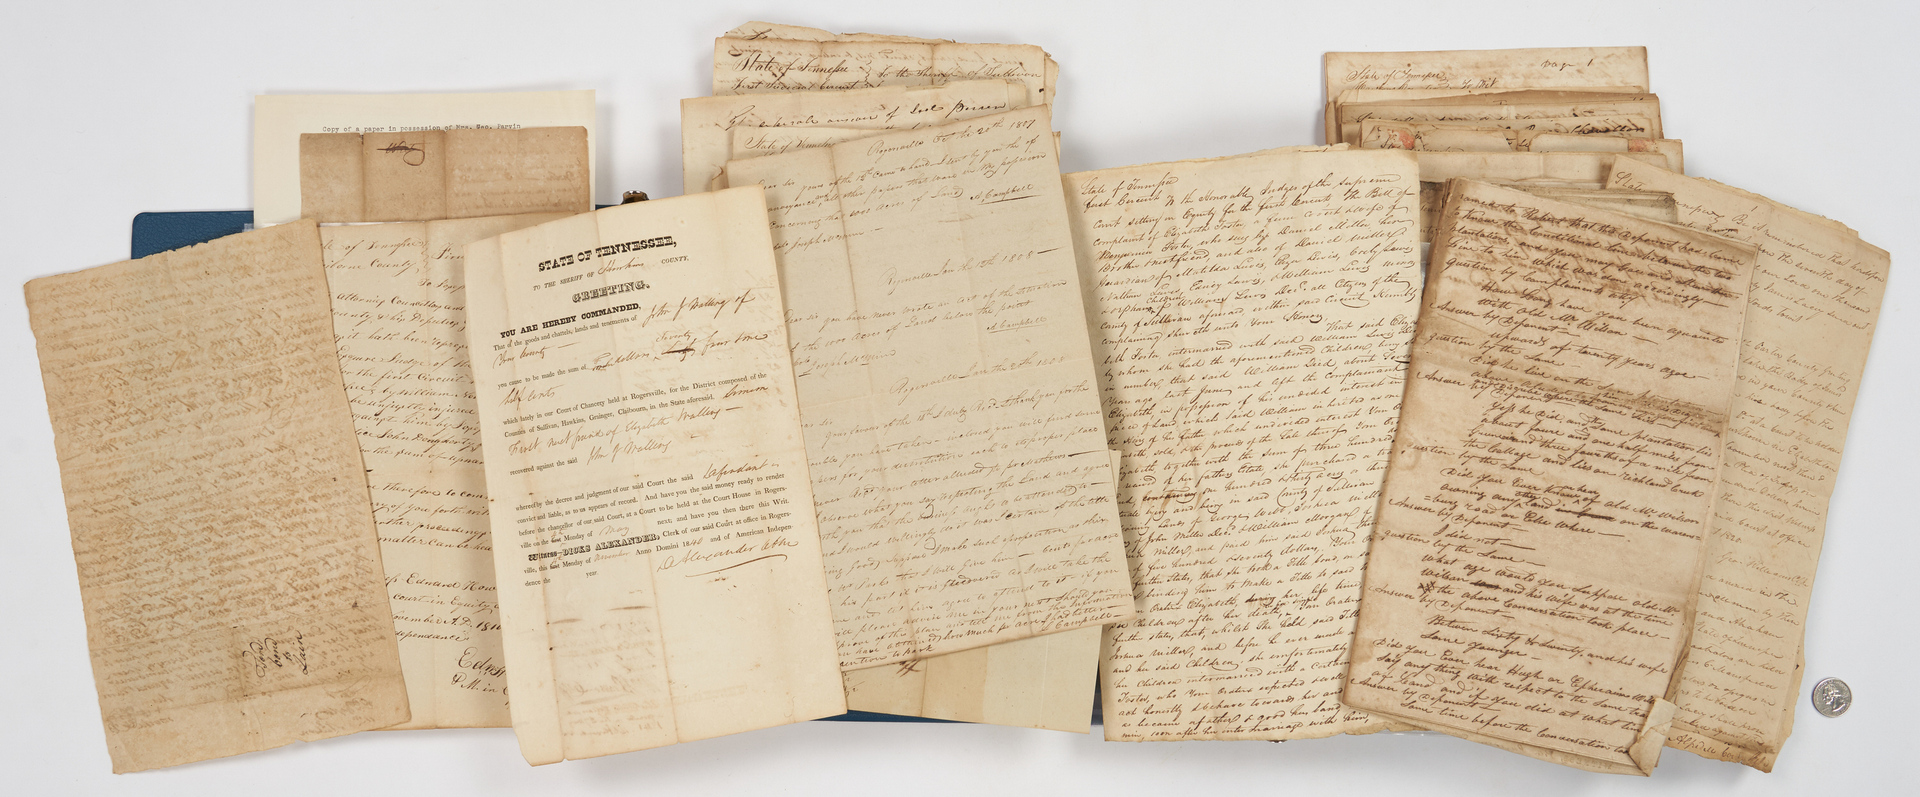 Lot 634: Large Early Tennessee Legal Archive, 100 plus items